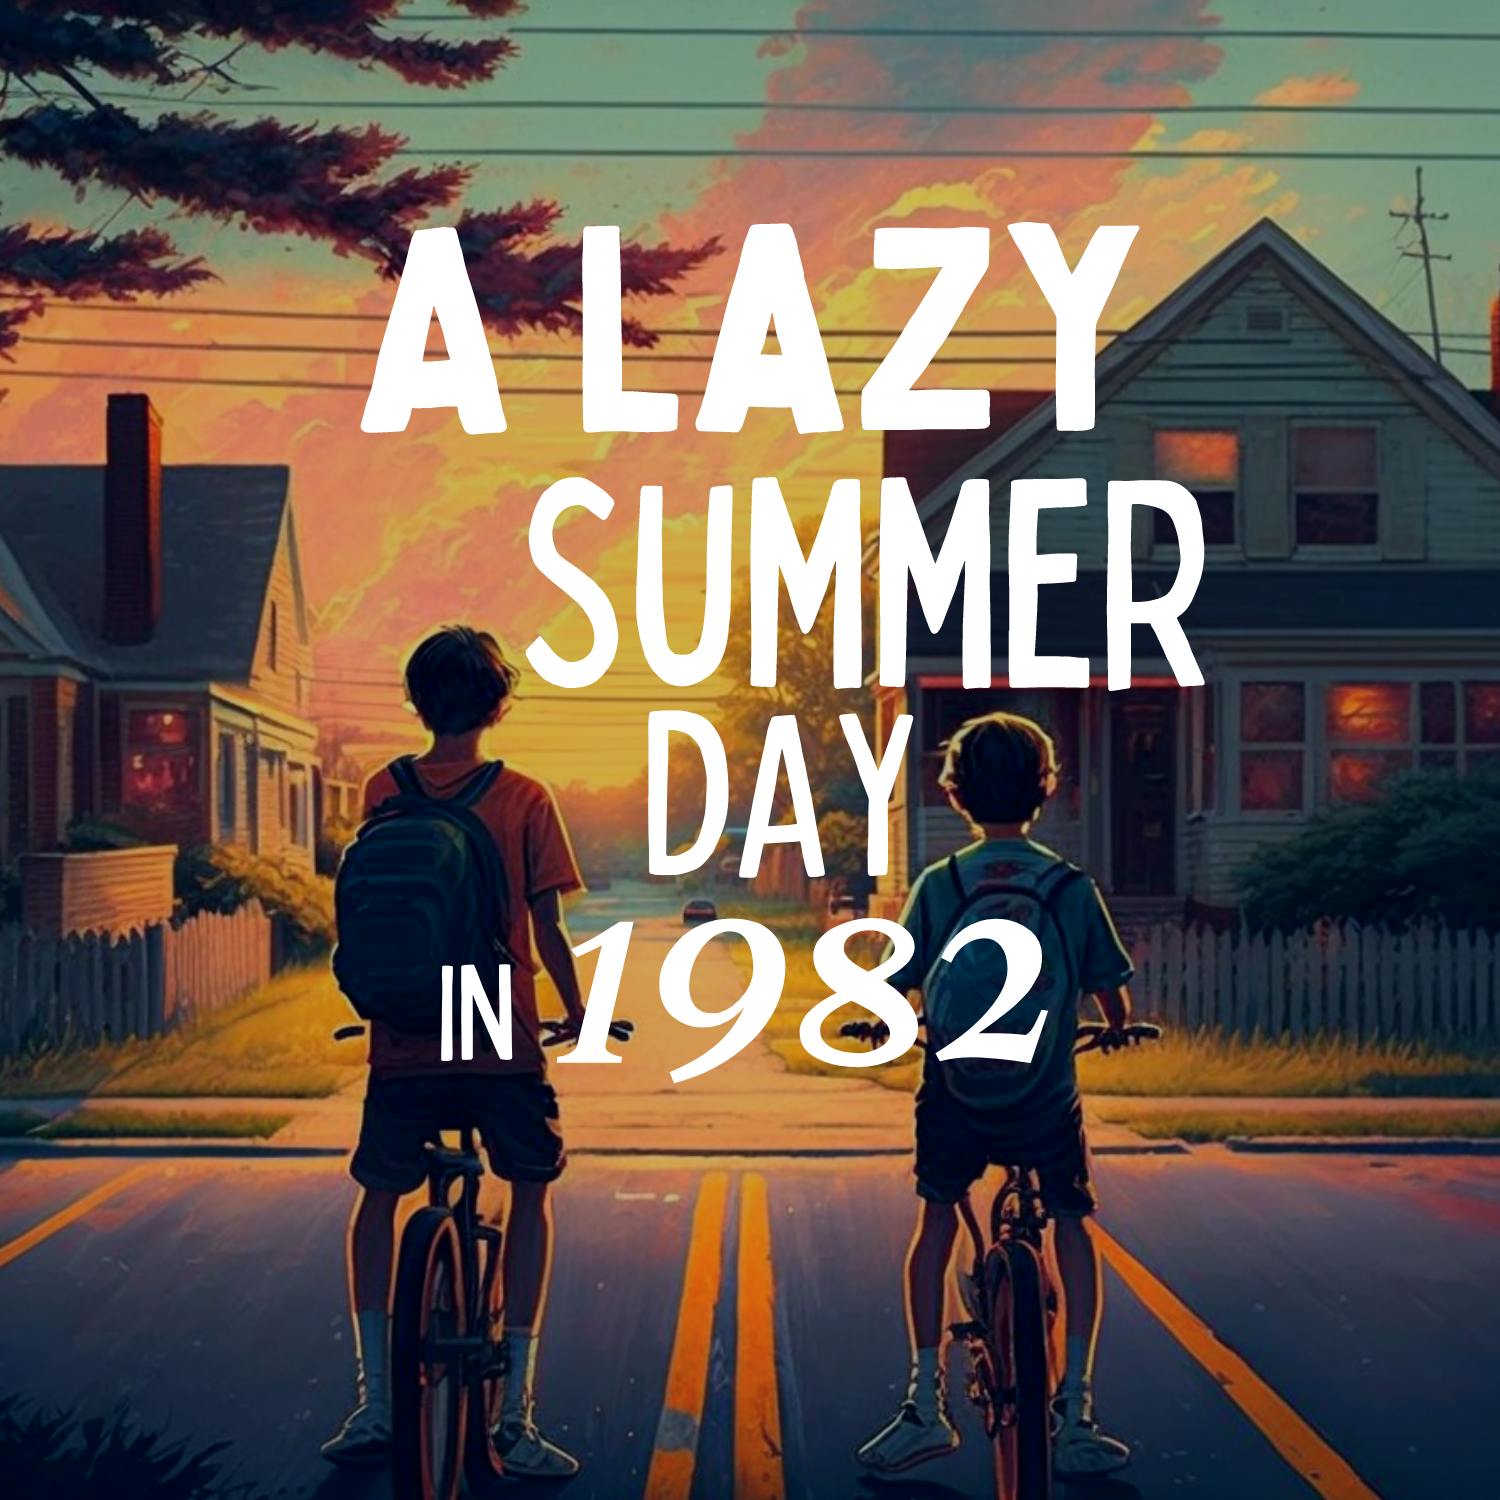 A Lazy Summer Day in 1982